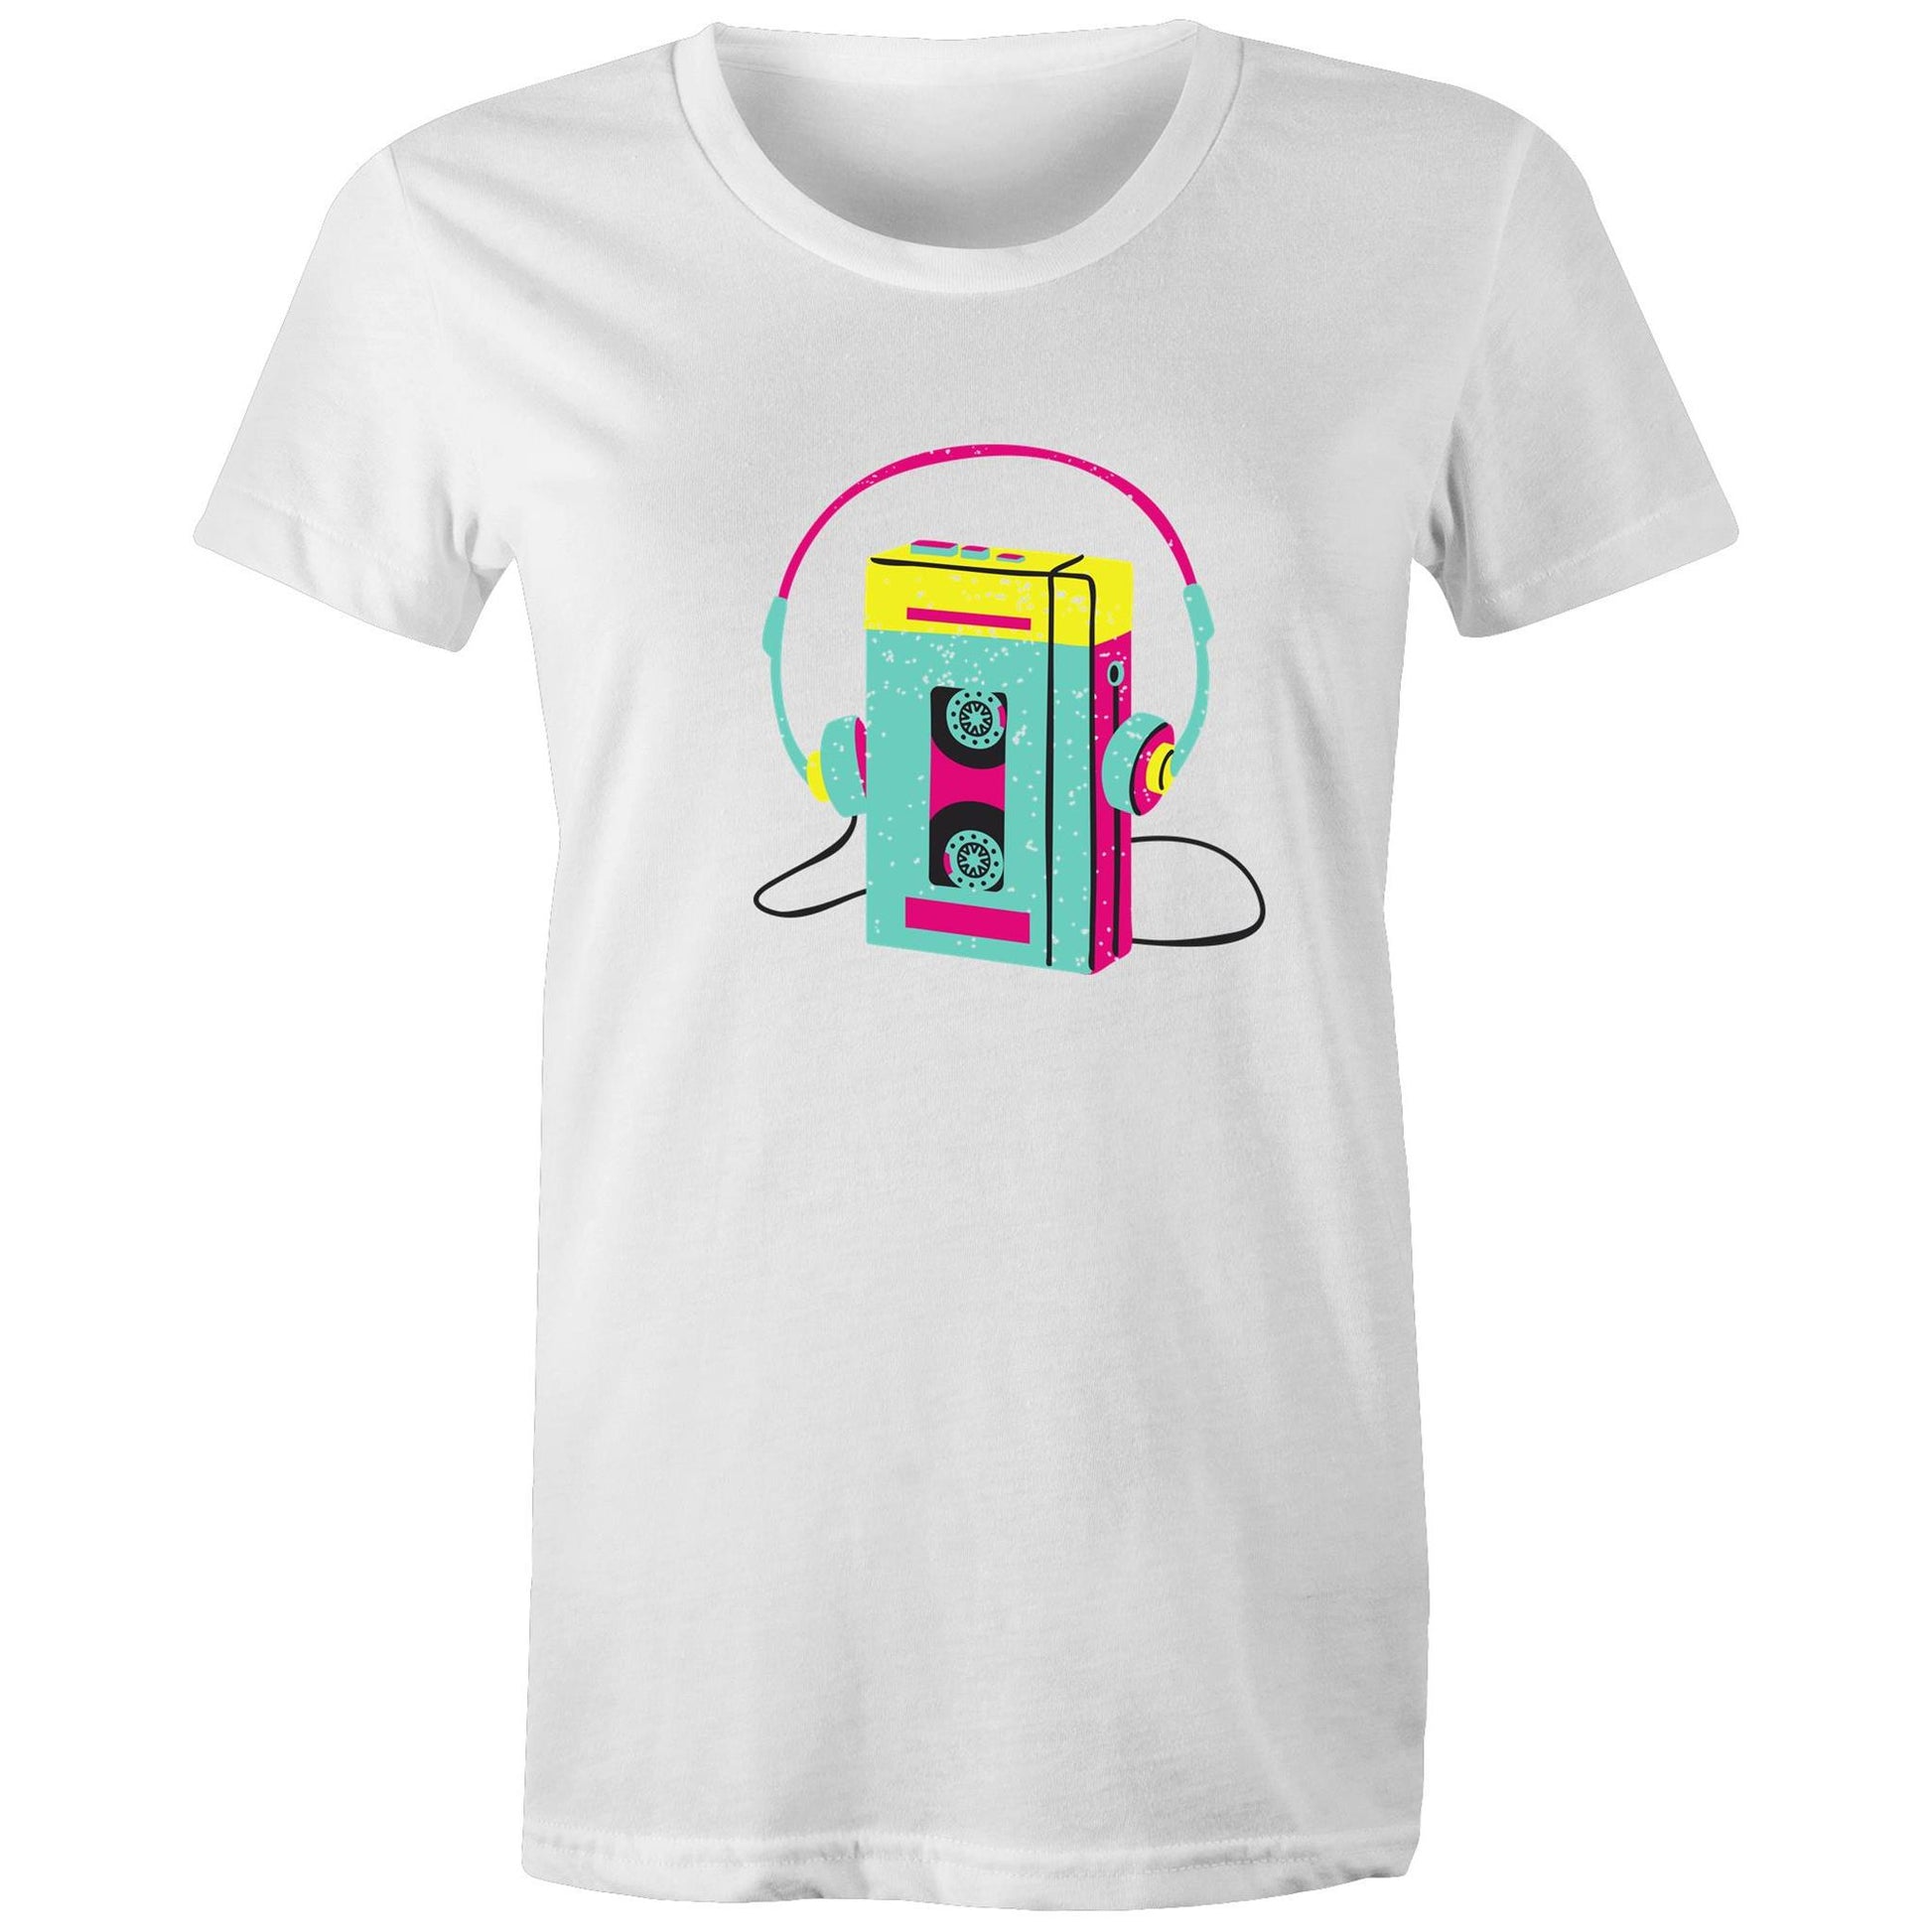 Wired For Sound, Music Player - Womens T-shirt White Womens T-shirt Music Retro Womens